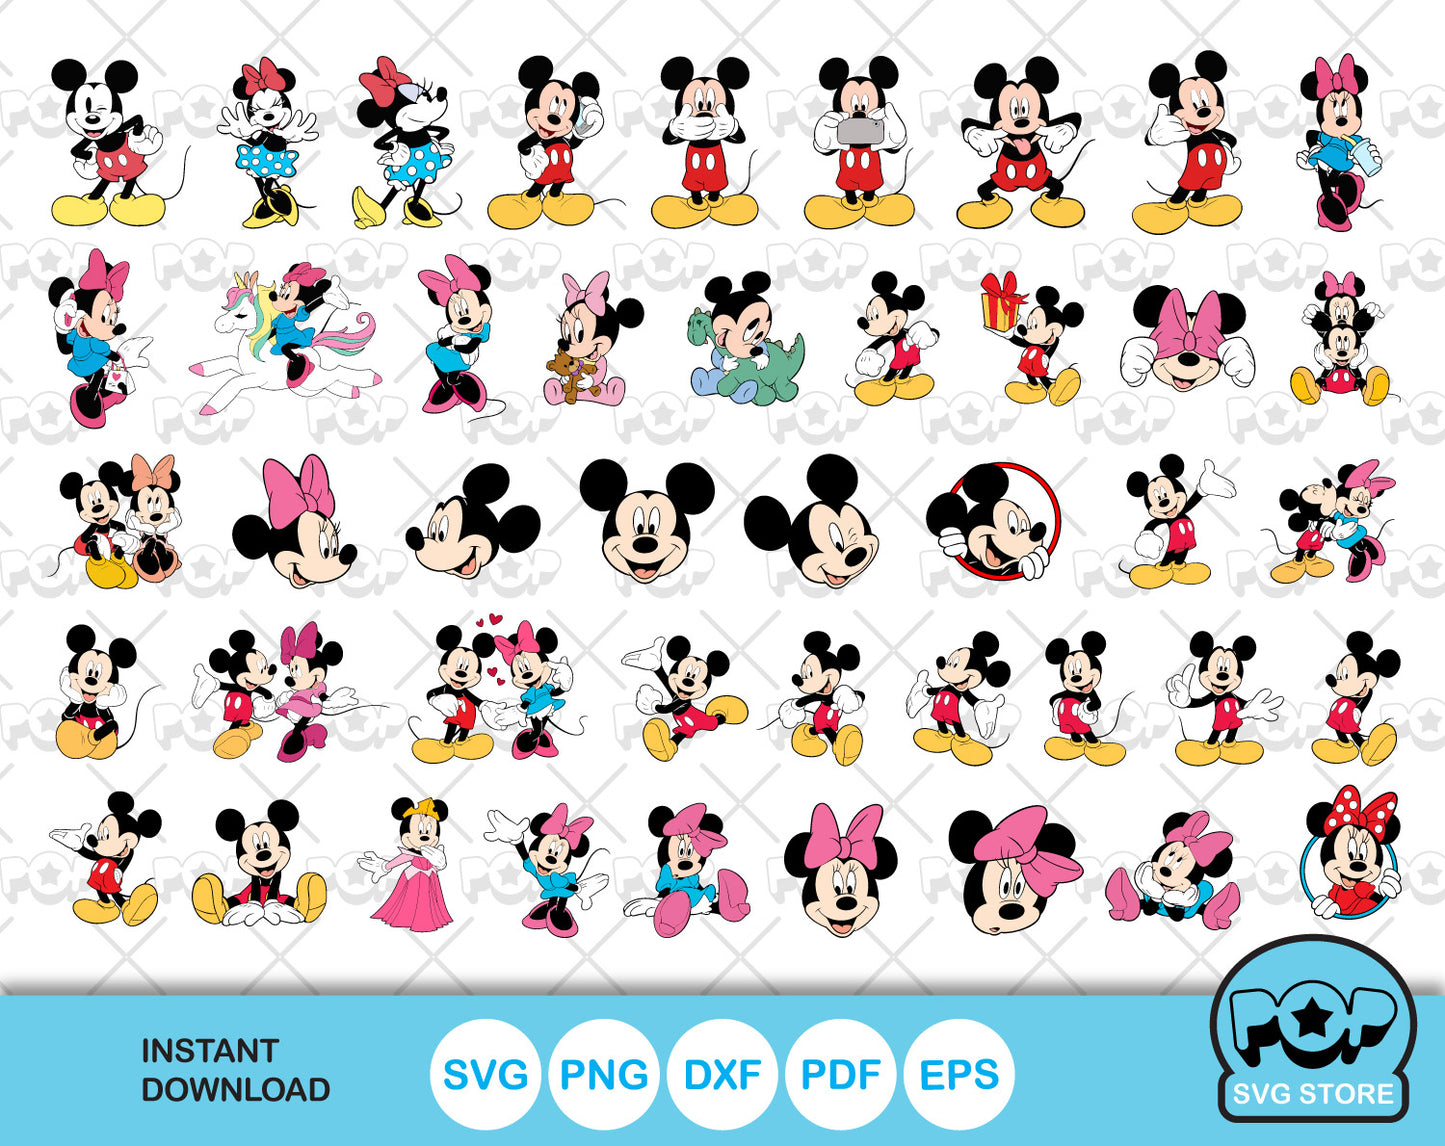 Mickey and Minnie clipart set, Disney SVG cut files for Cricut / Silhouette, Mickey Mouse SVG, instant download